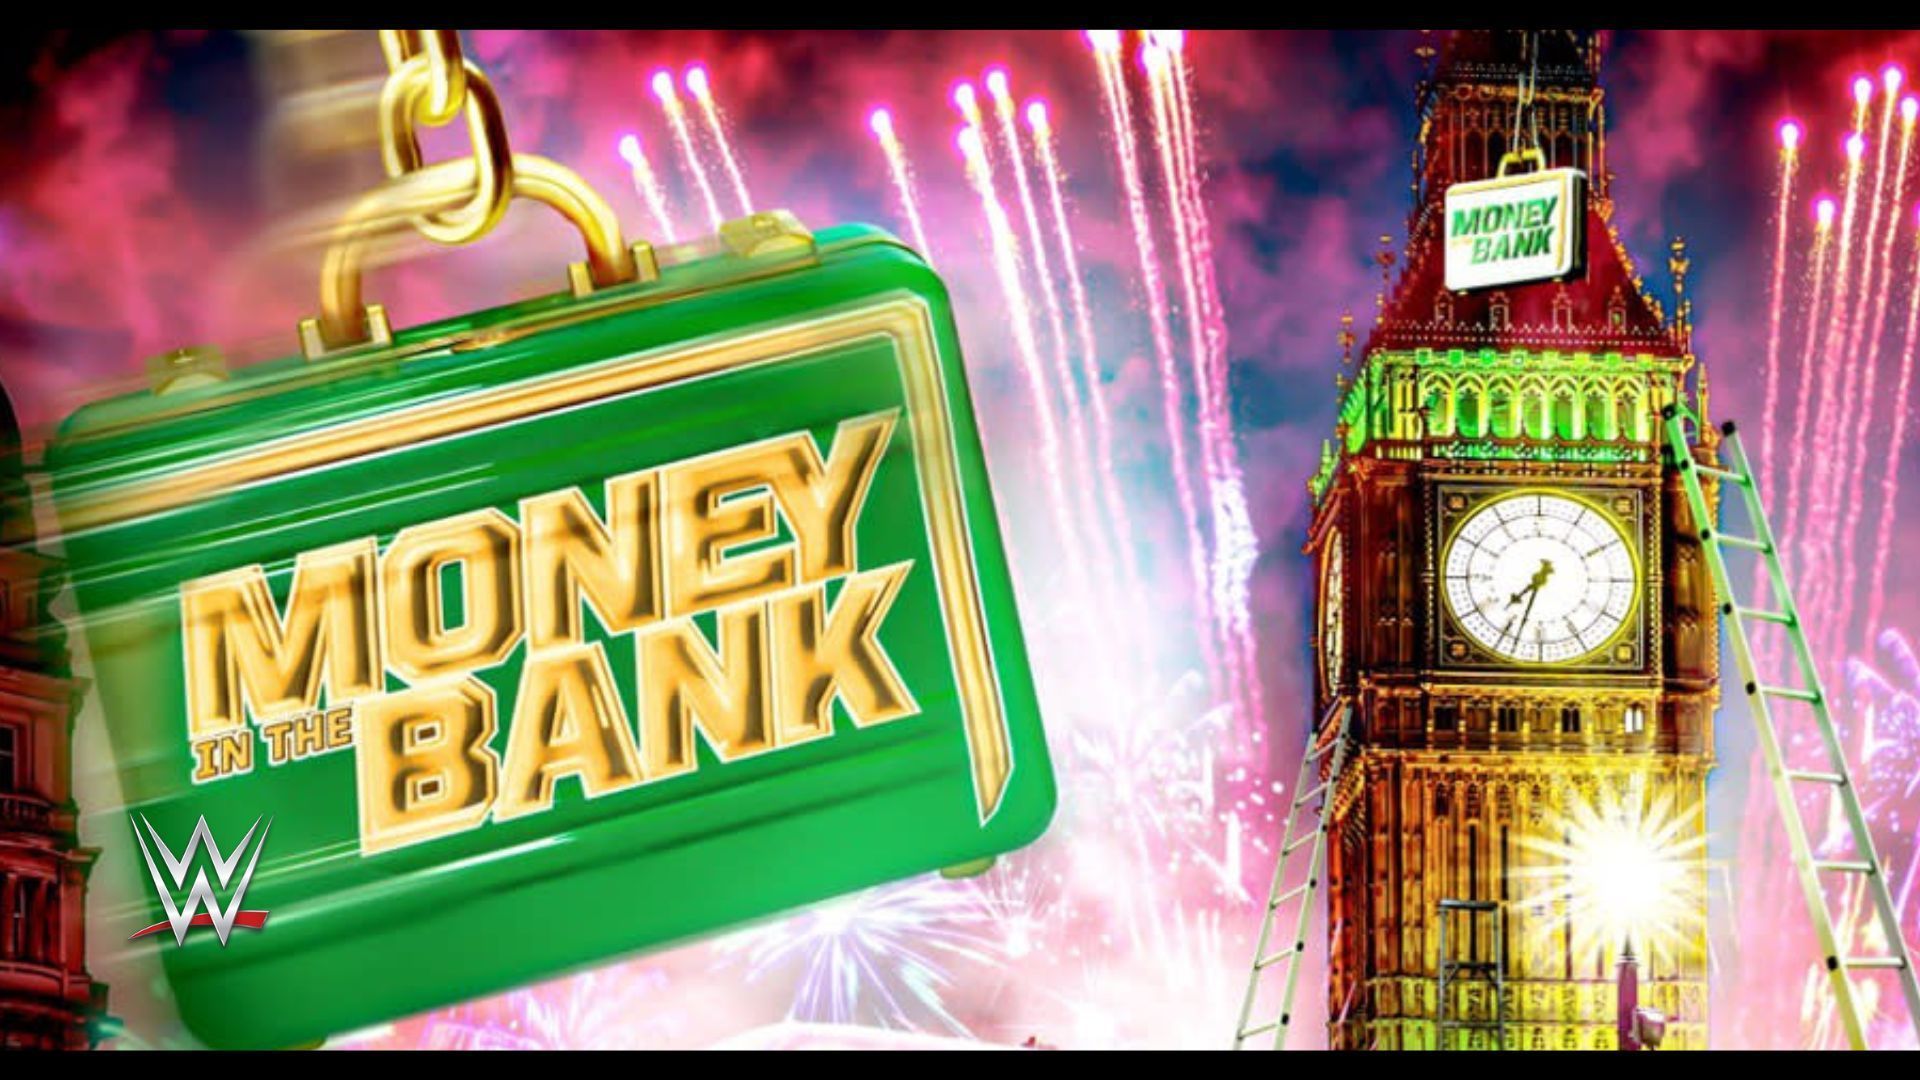 Money in the Bank is set to take place at the O2 Arena in London, UK this year